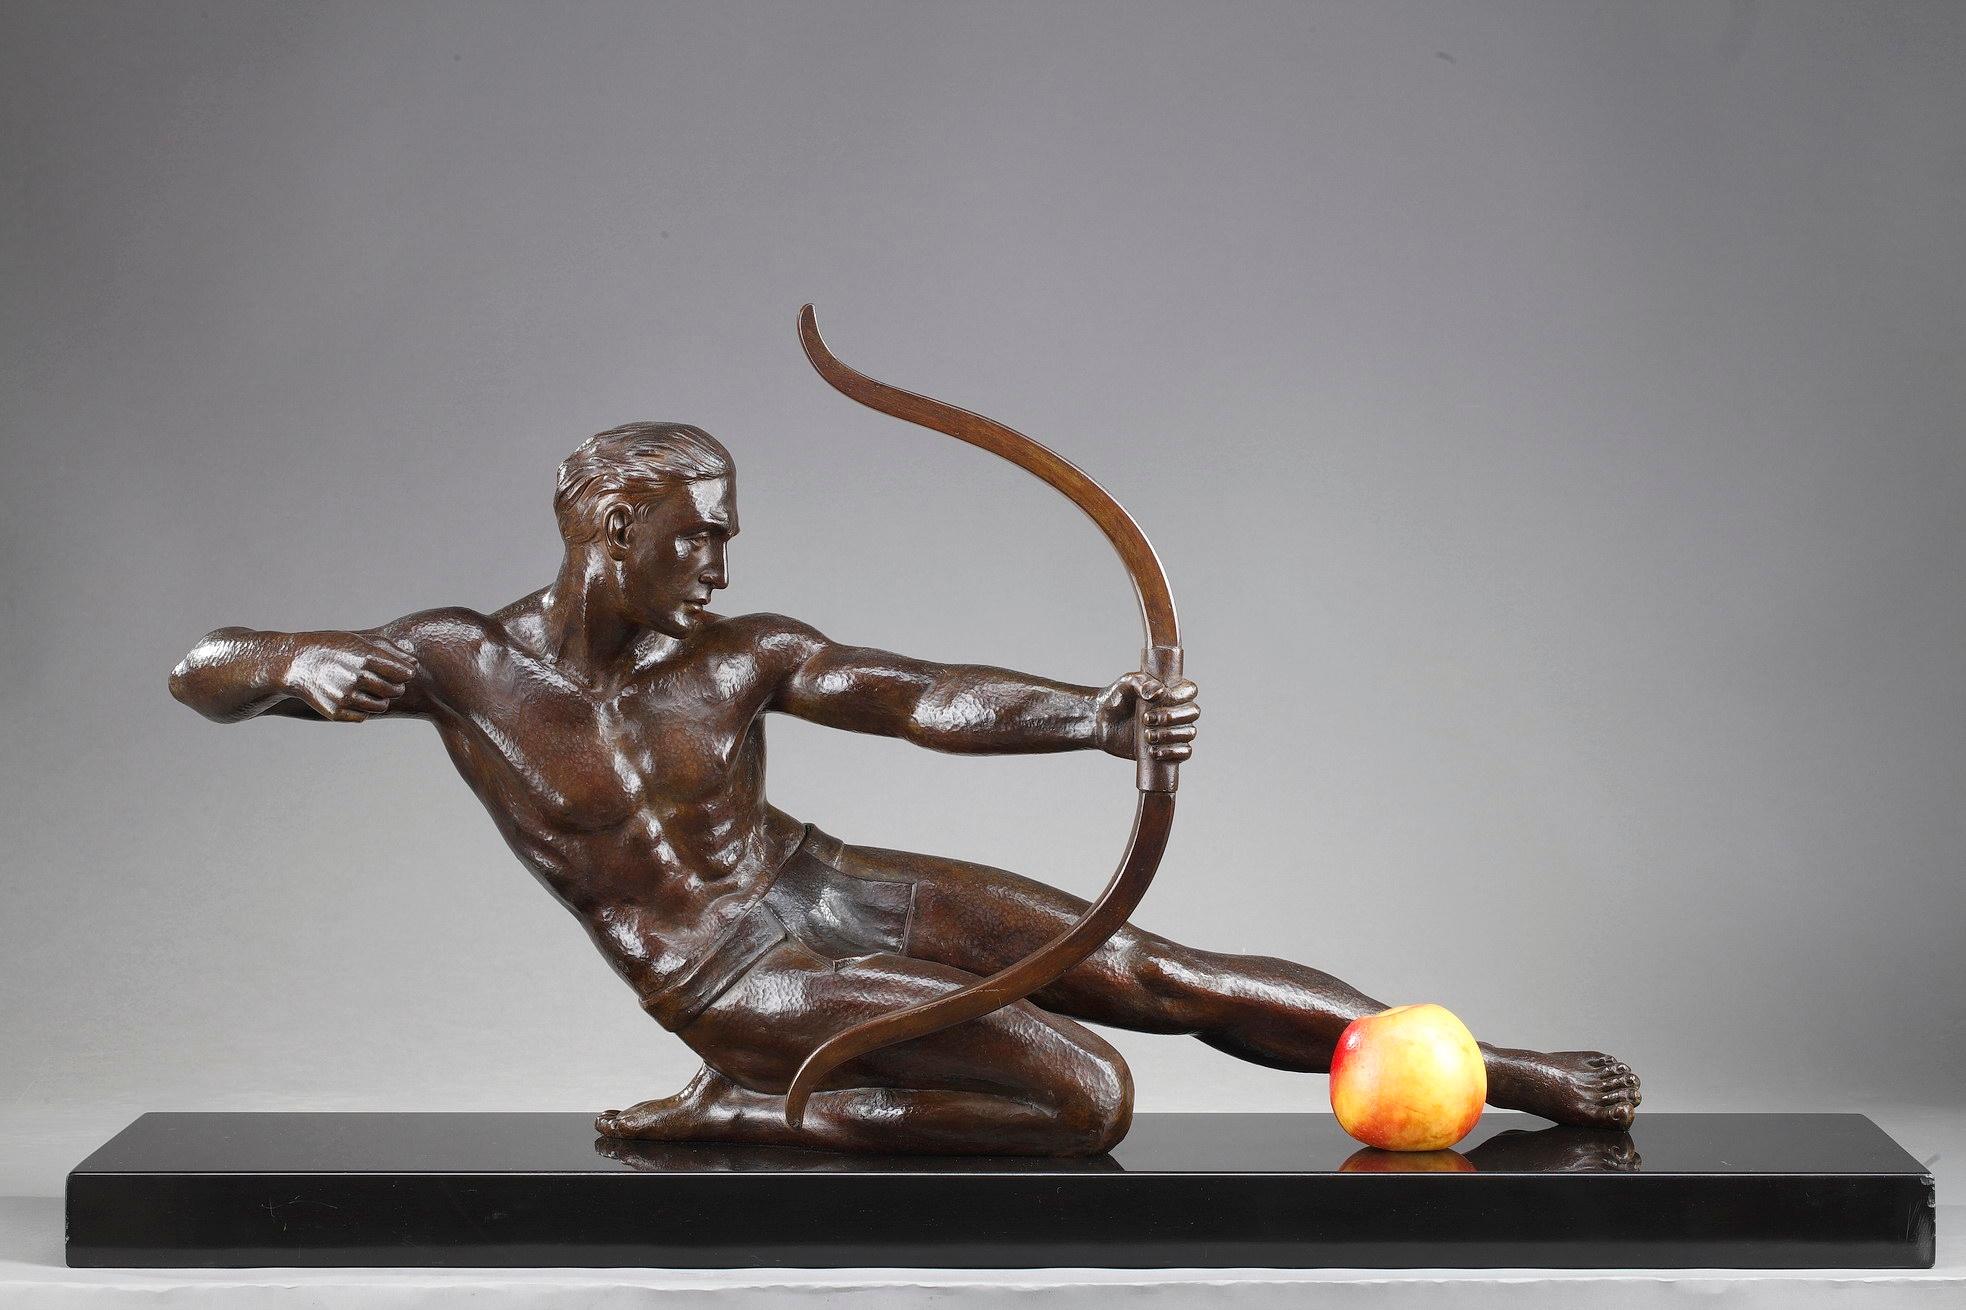 This Art Deco-era statue crafted of patinated bronze captures an archer bending his bow. The figure is rendered with an impressive tension and energy. The nude athlete inspired by the Greek sculpture, has an arm bending the bow and the right foot